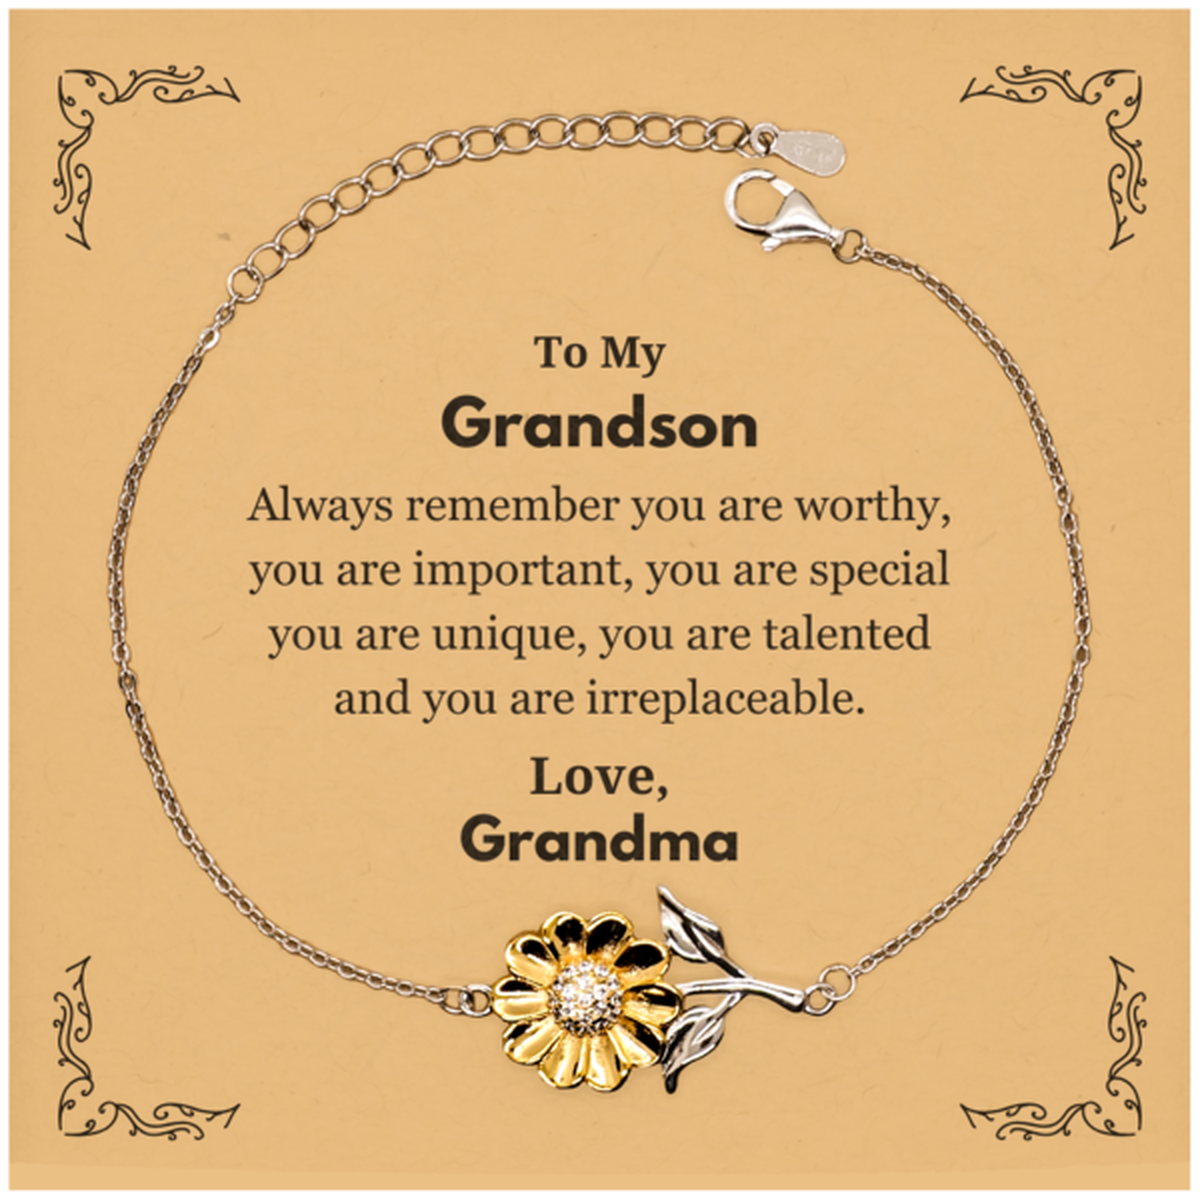 Grandson Birthday Gifts from Grandma, Inspirational Sunflower Bracelet for Grandson Christmas Graduation Gifts for Grandson Always remember you are worthy, you are important. Love, Grandma